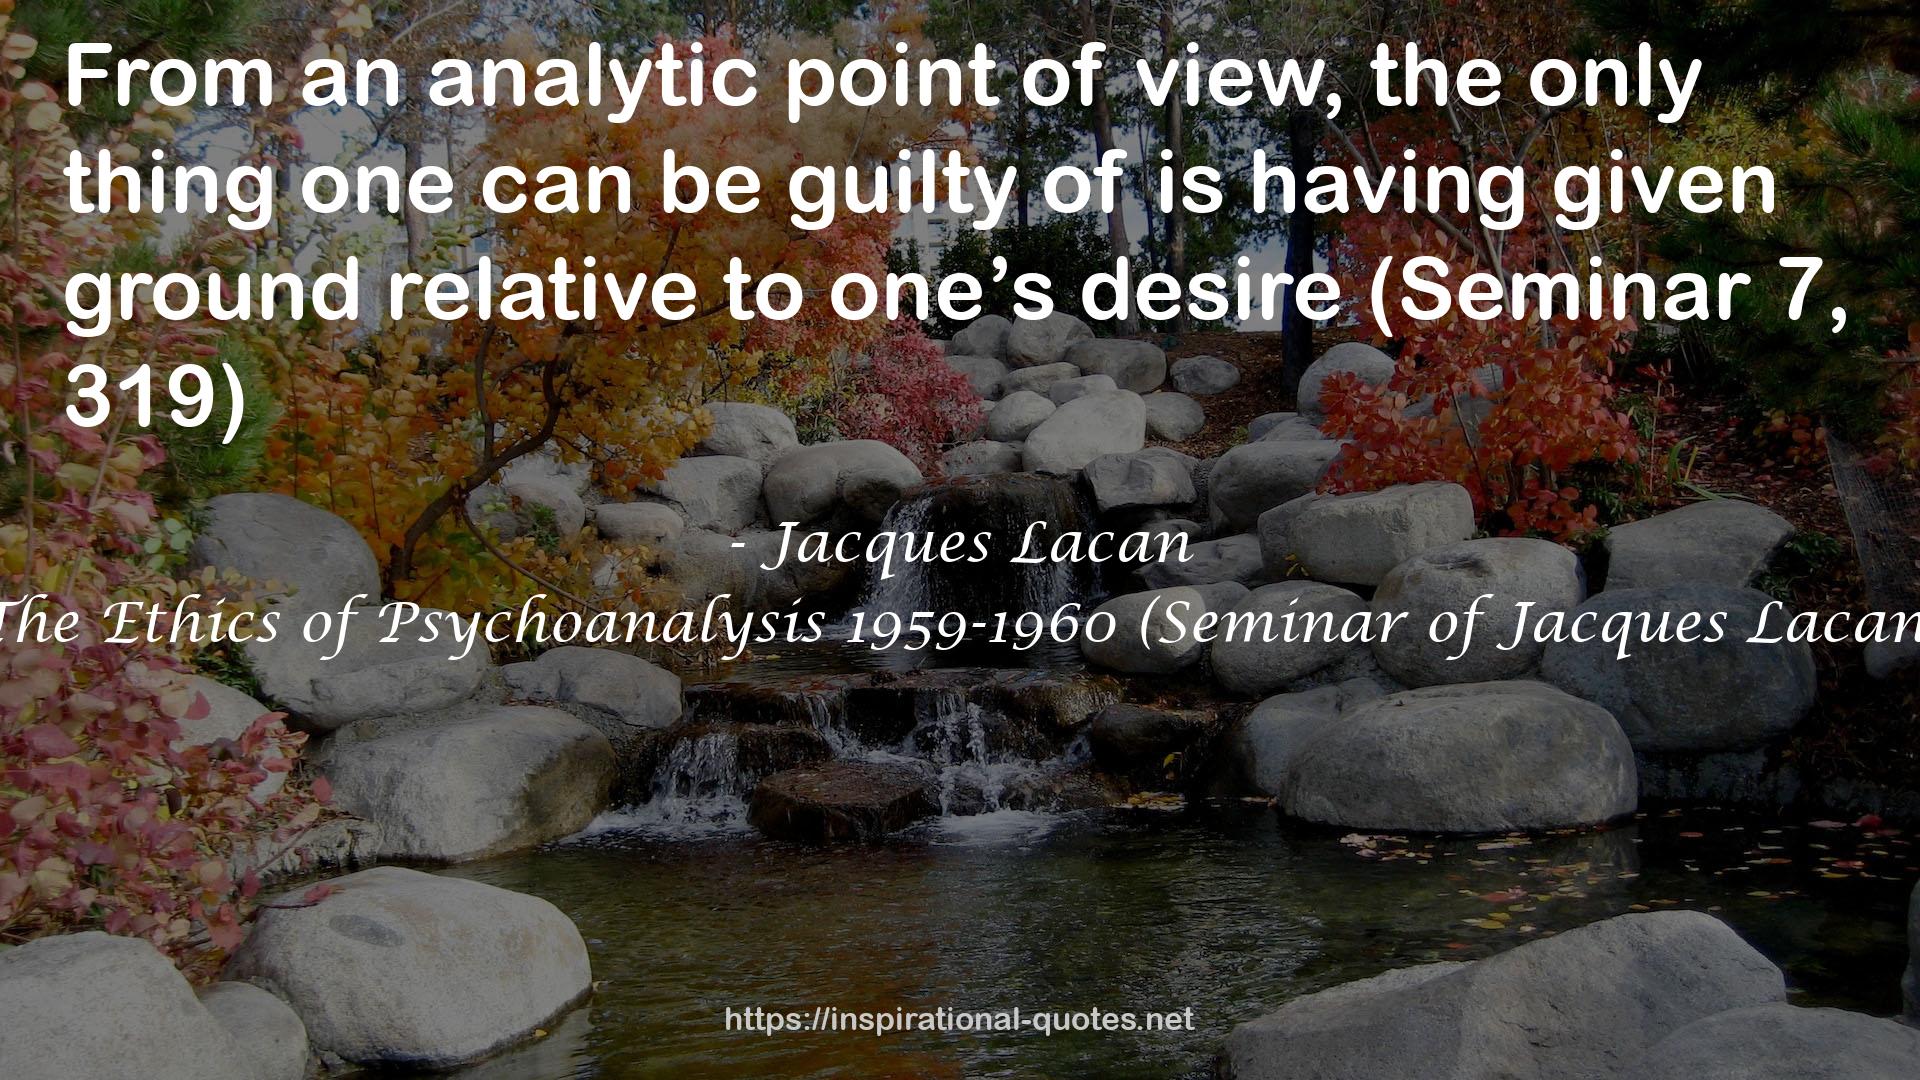 The Ethics of Psychoanalysis 1959-1960 (Seminar of Jacques Lacan) QUOTES